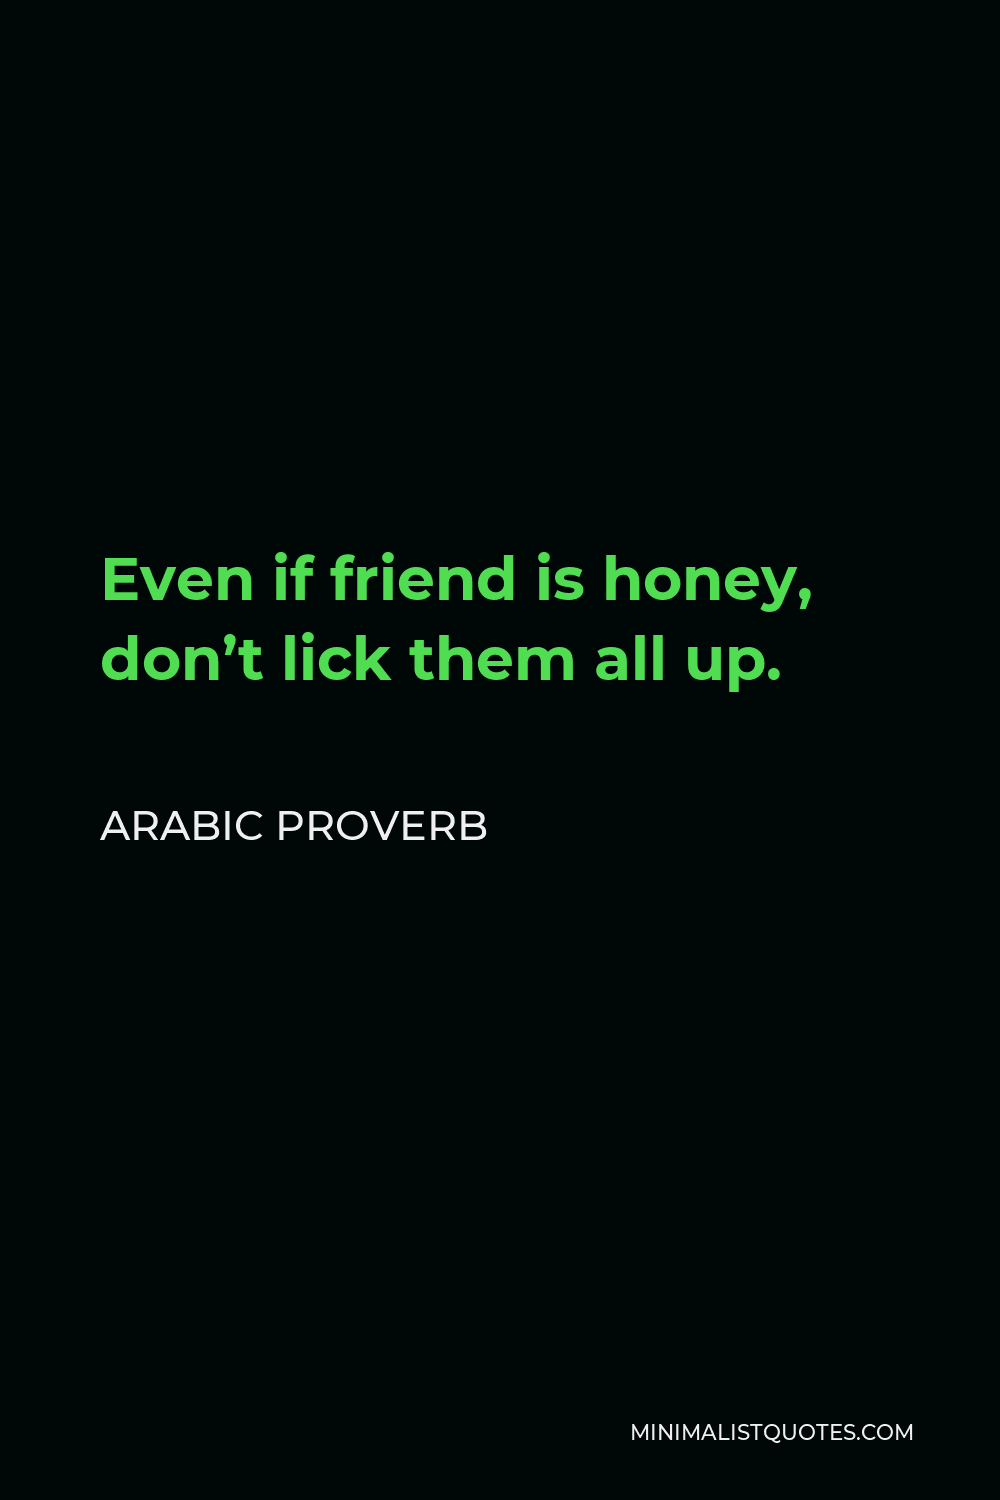 Arabic Proverb Quote - Even if friend is honey, don’t lick them all up.